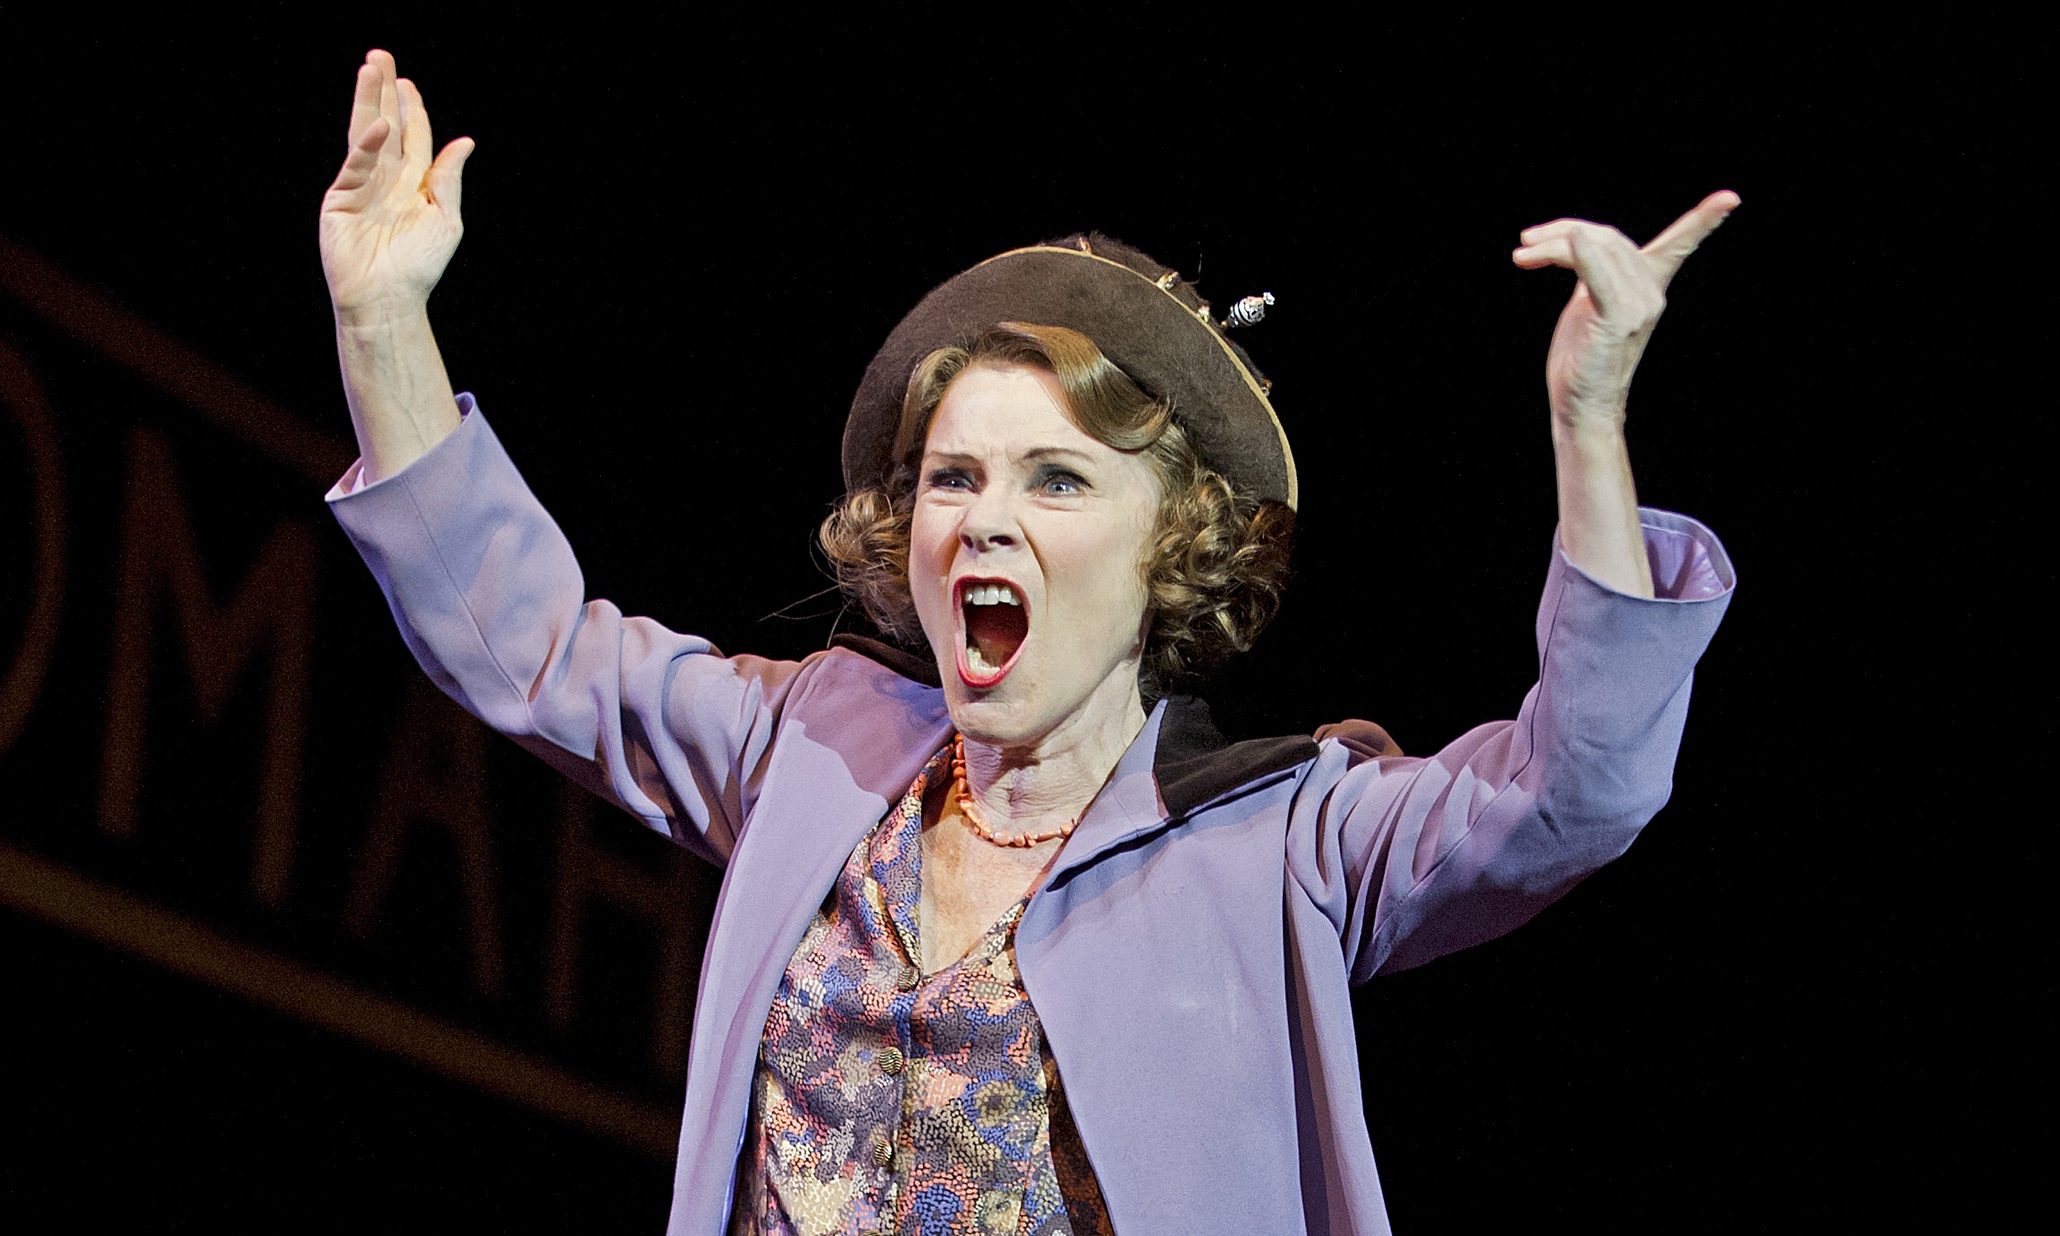 Gypsy review – Imelda Staunton gives ‘one of the greatest performances I’ve ever ...